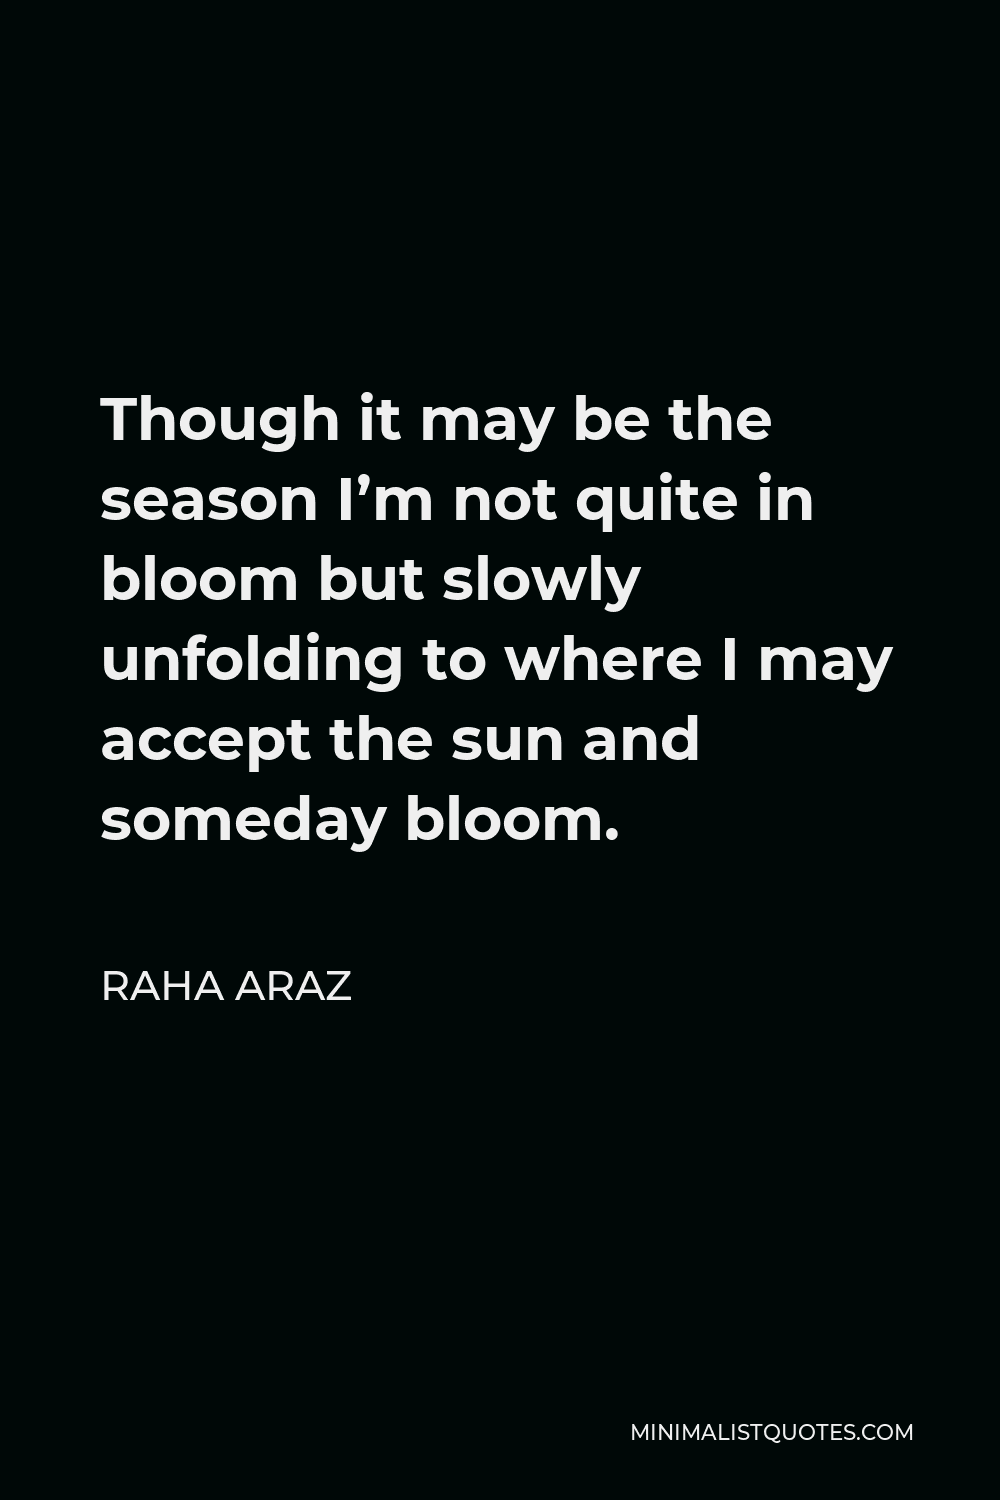 Raha Araz Quote - Though it may be the season I’m not quite in bloom but slowly unfolding to where I may accept the sun and someday bloom.